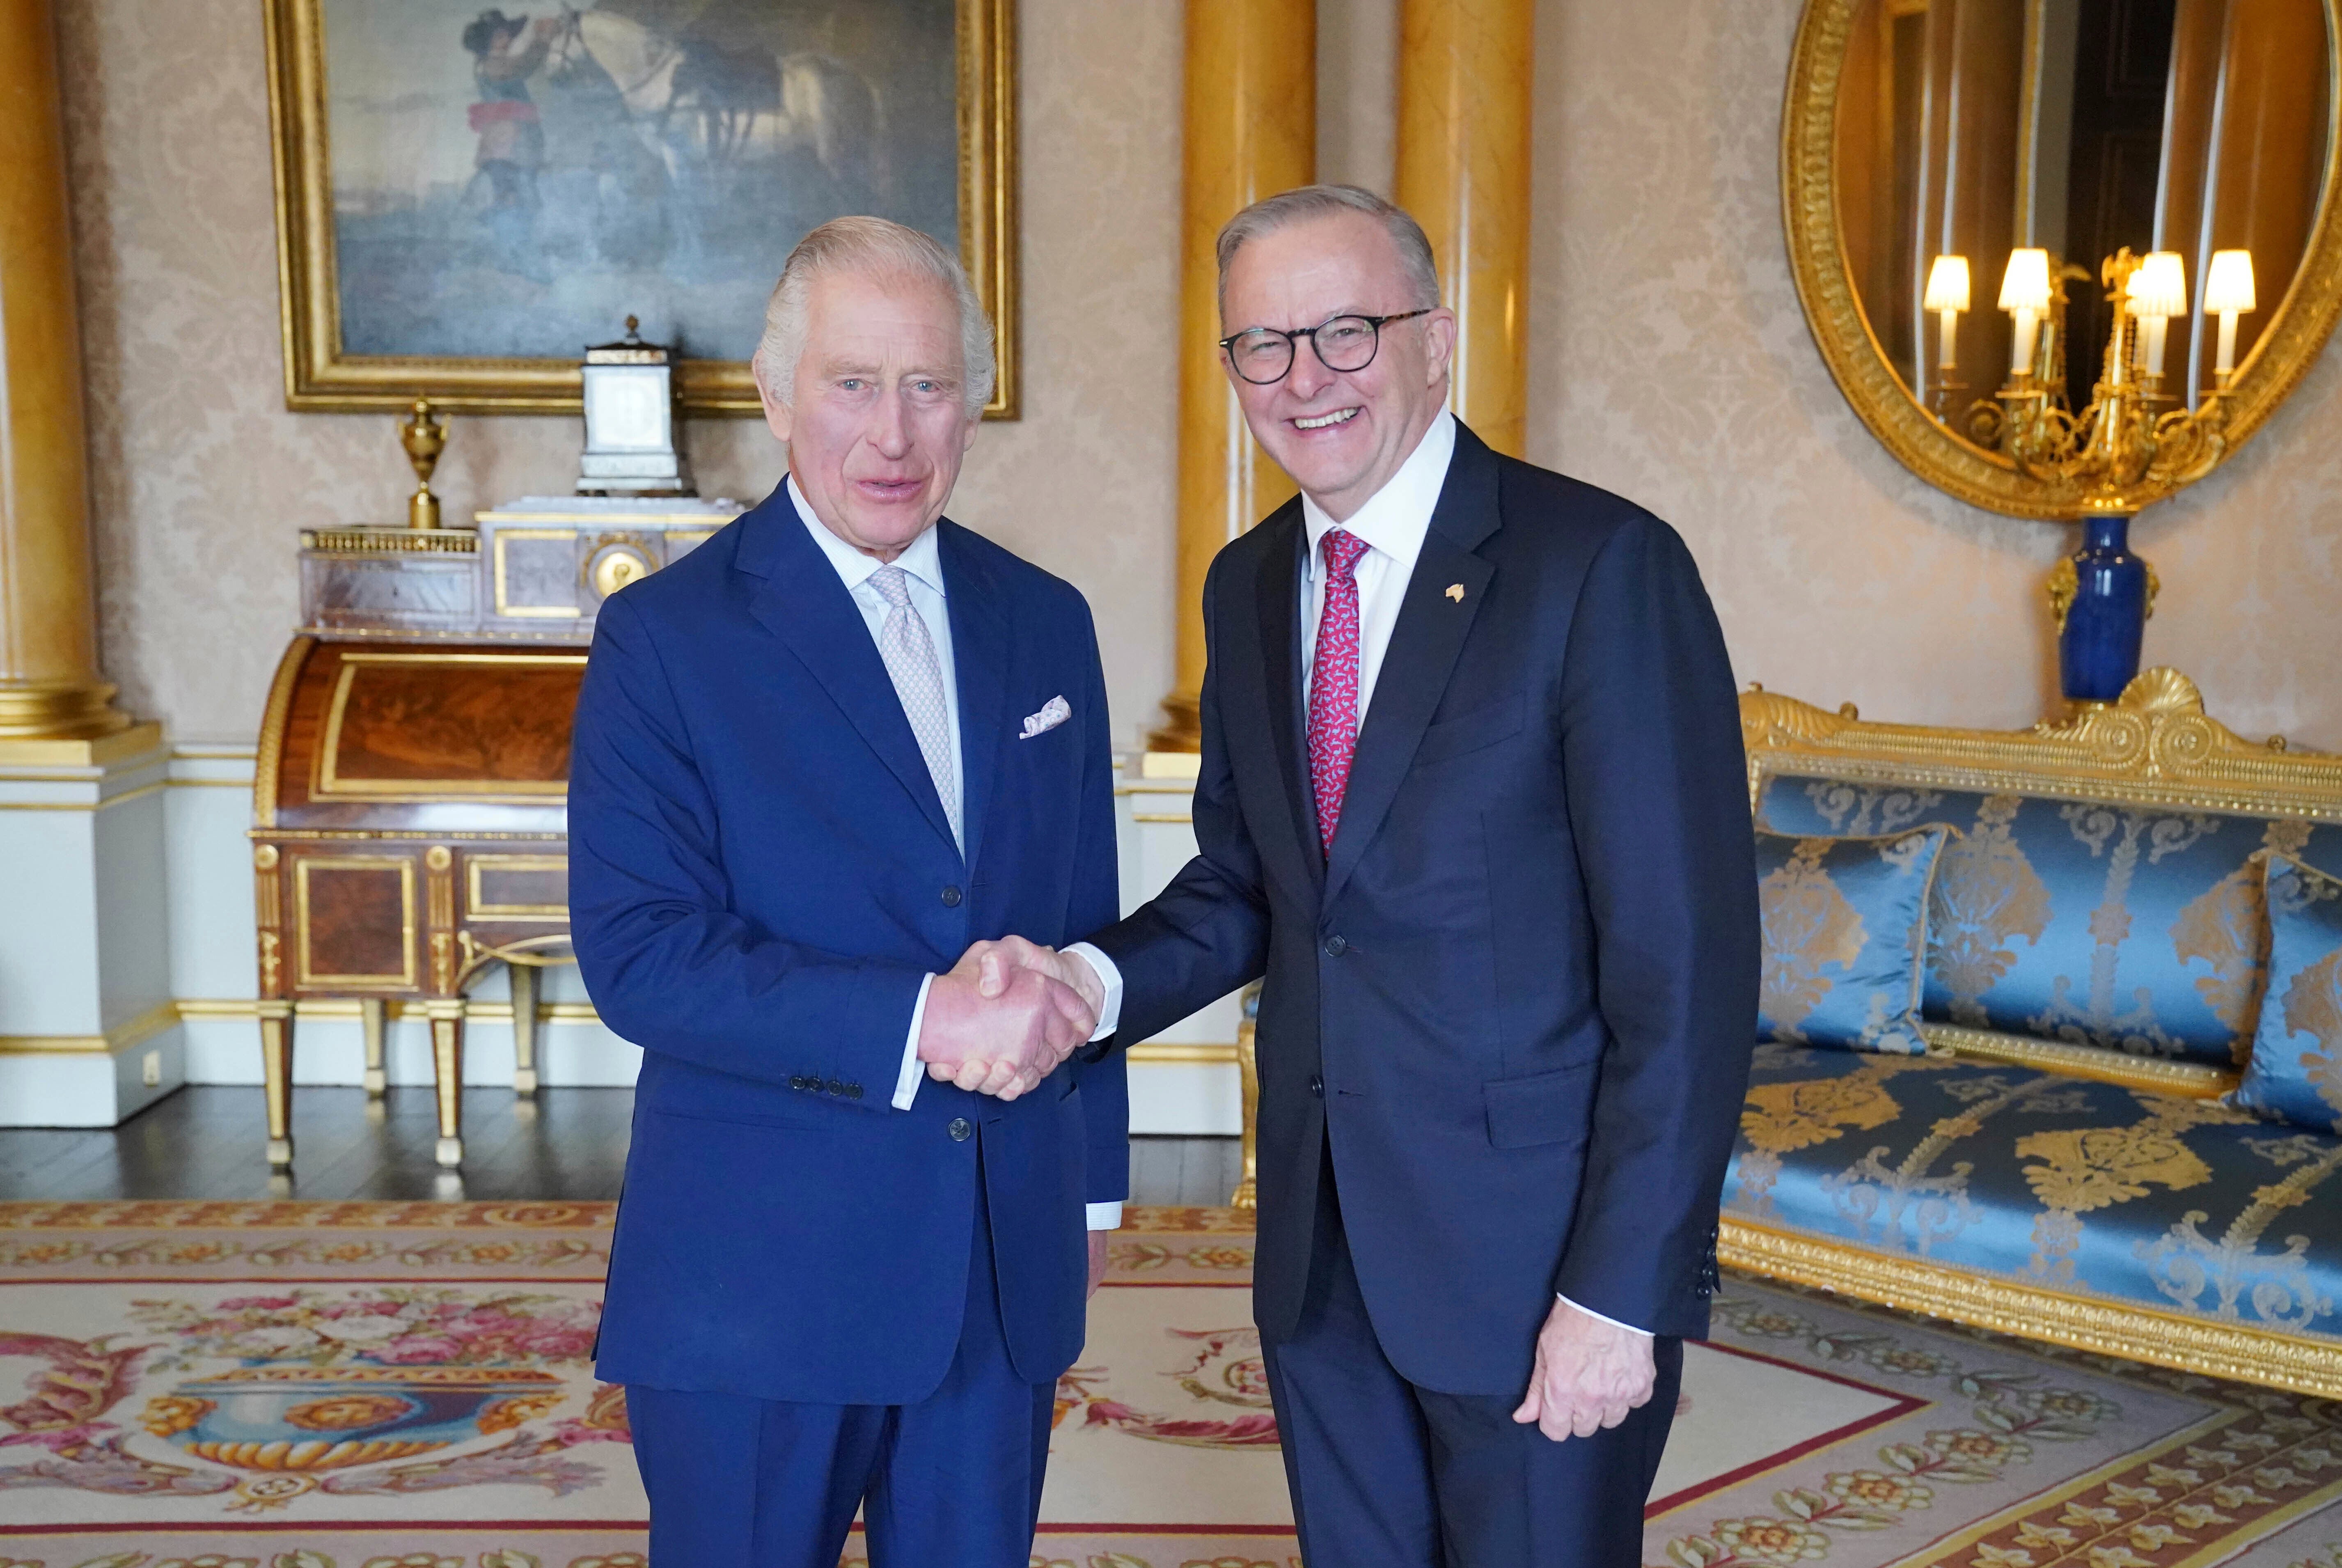 King Charles III receives Australian prime minister Anthony Albanese during an audience at Buckingham Palace in London in May